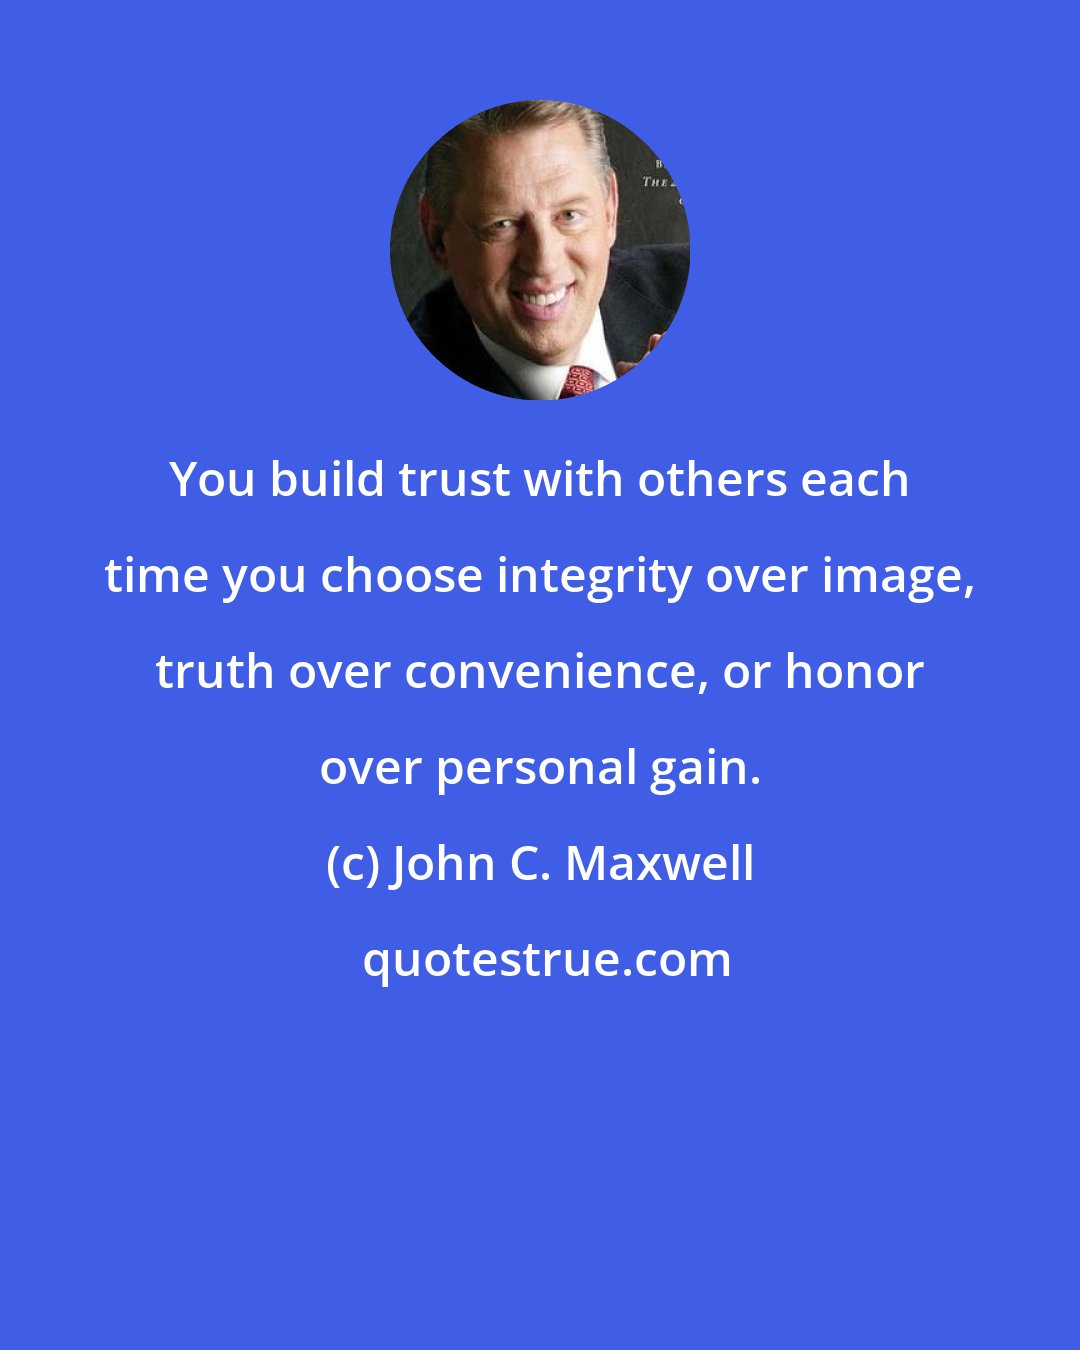 John C. Maxwell: You build trust with others each time you choose integrity over image, truth over convenience, or honor over personal gain.